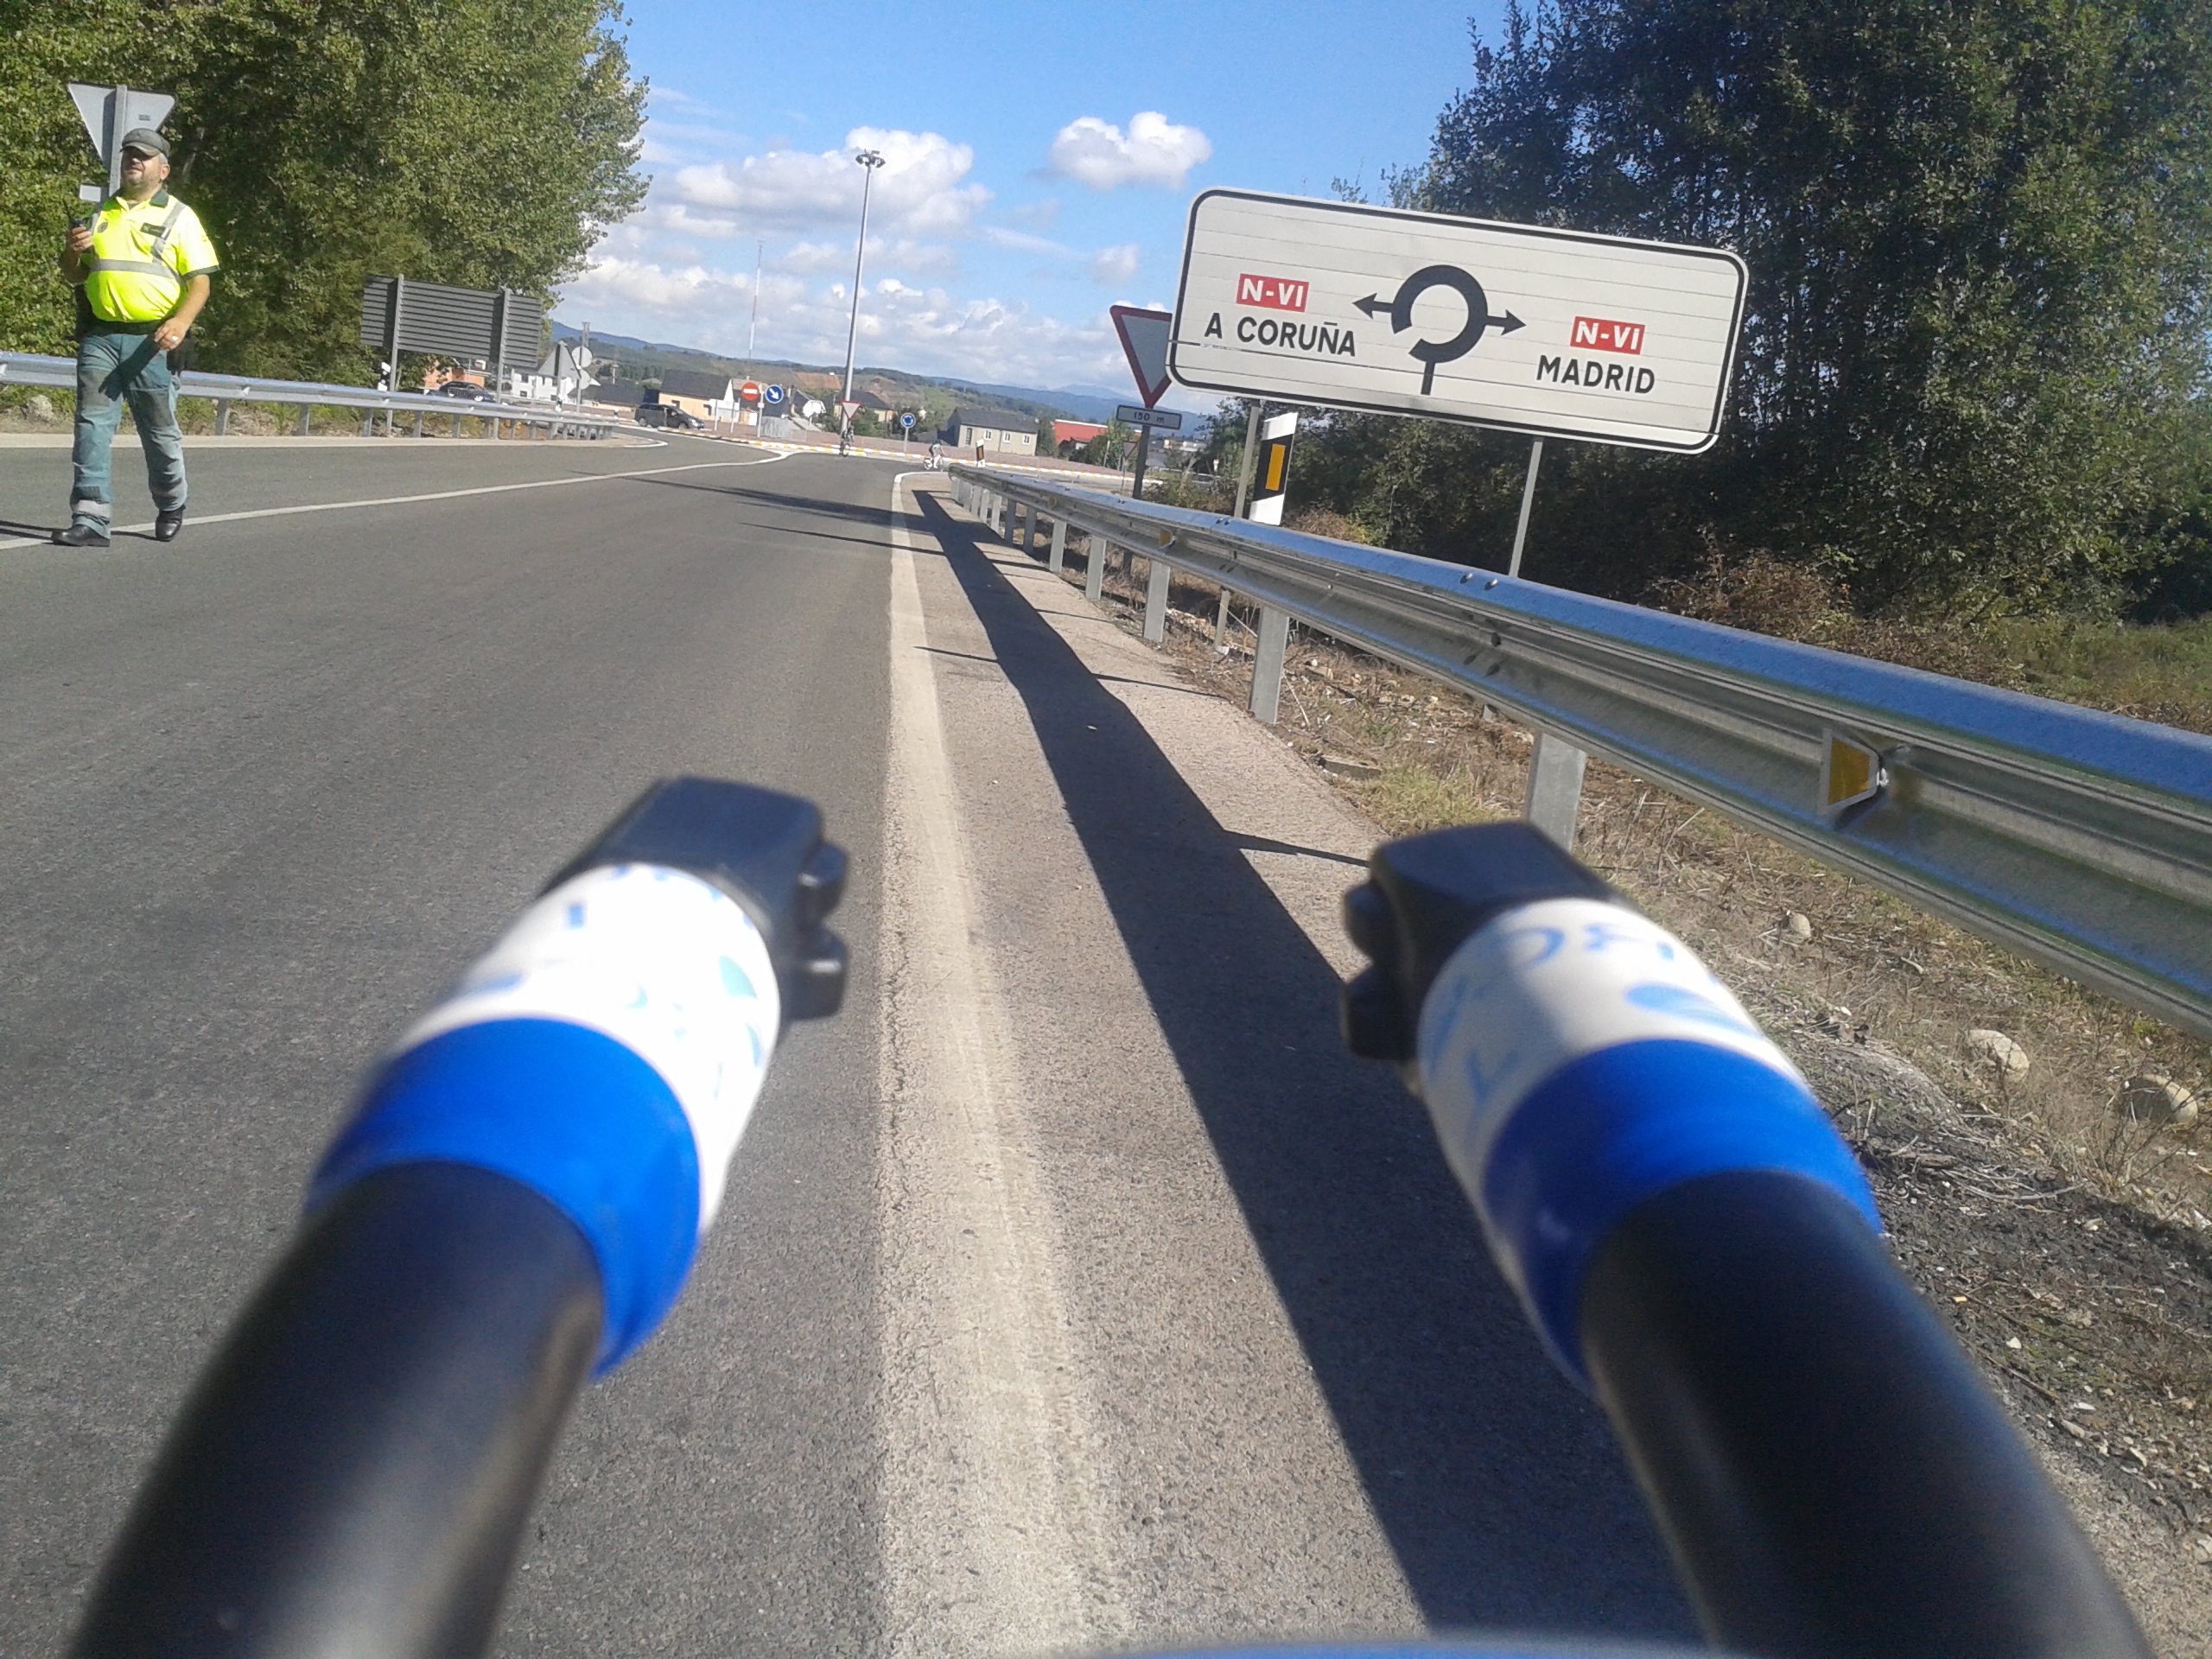 Photo: You know you’re #livingthedream when you see signs to Madrid on your training ride. 